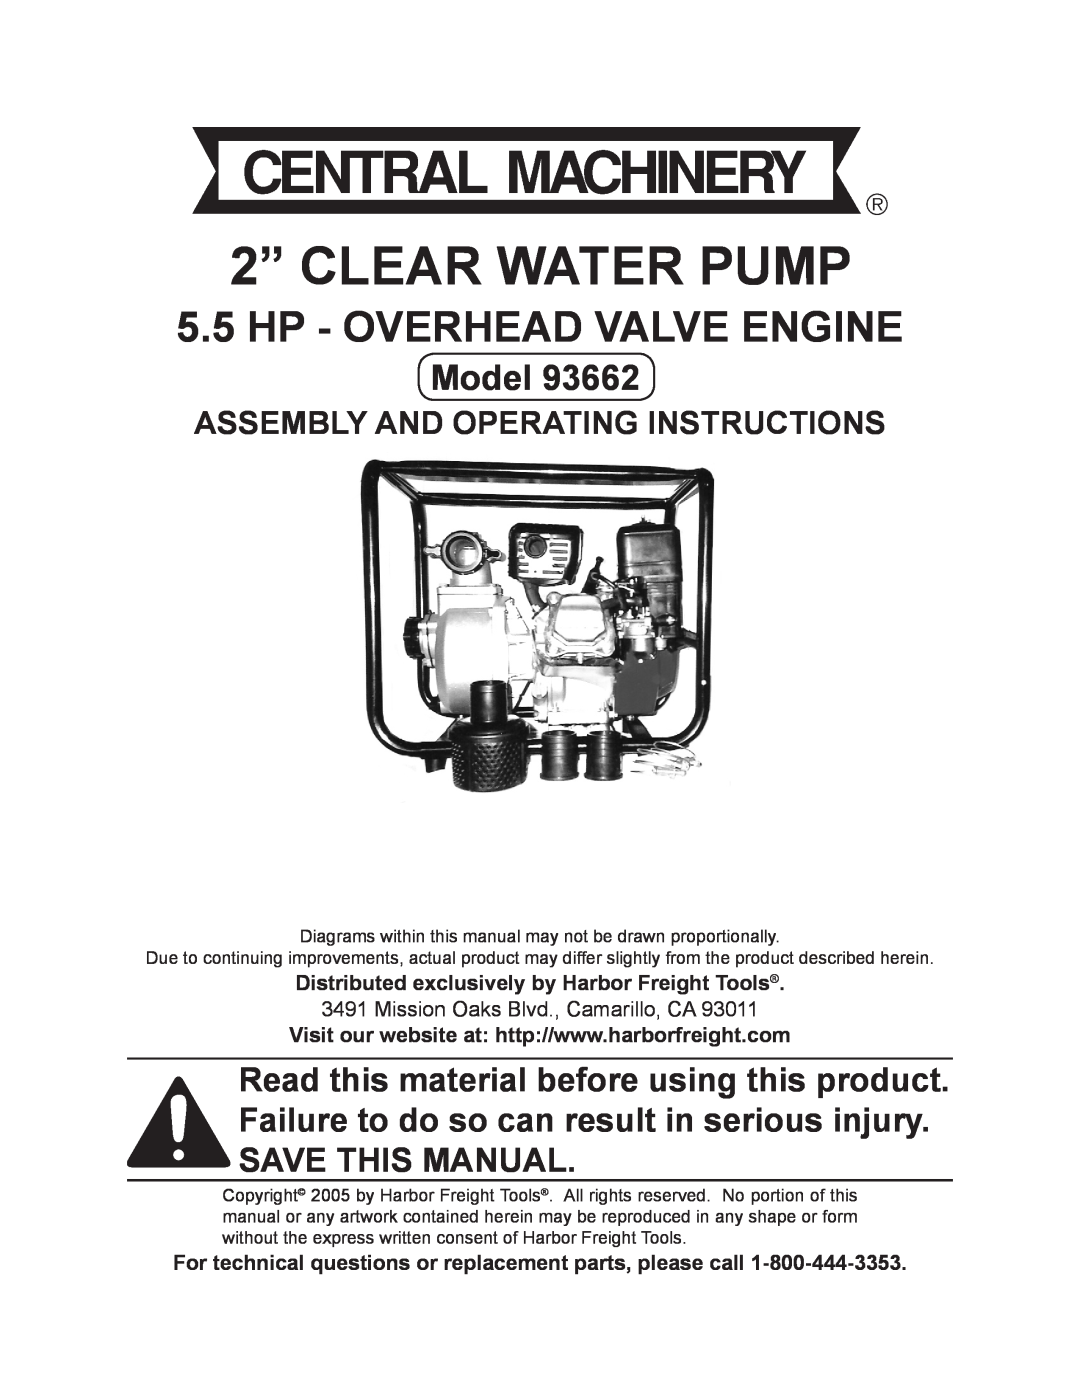 Harbor Freight Tools 93662 manual Assembly And Operating Instructions, 2” CLEAR WATER PUMP, Hp - Overhead Valve Engine 